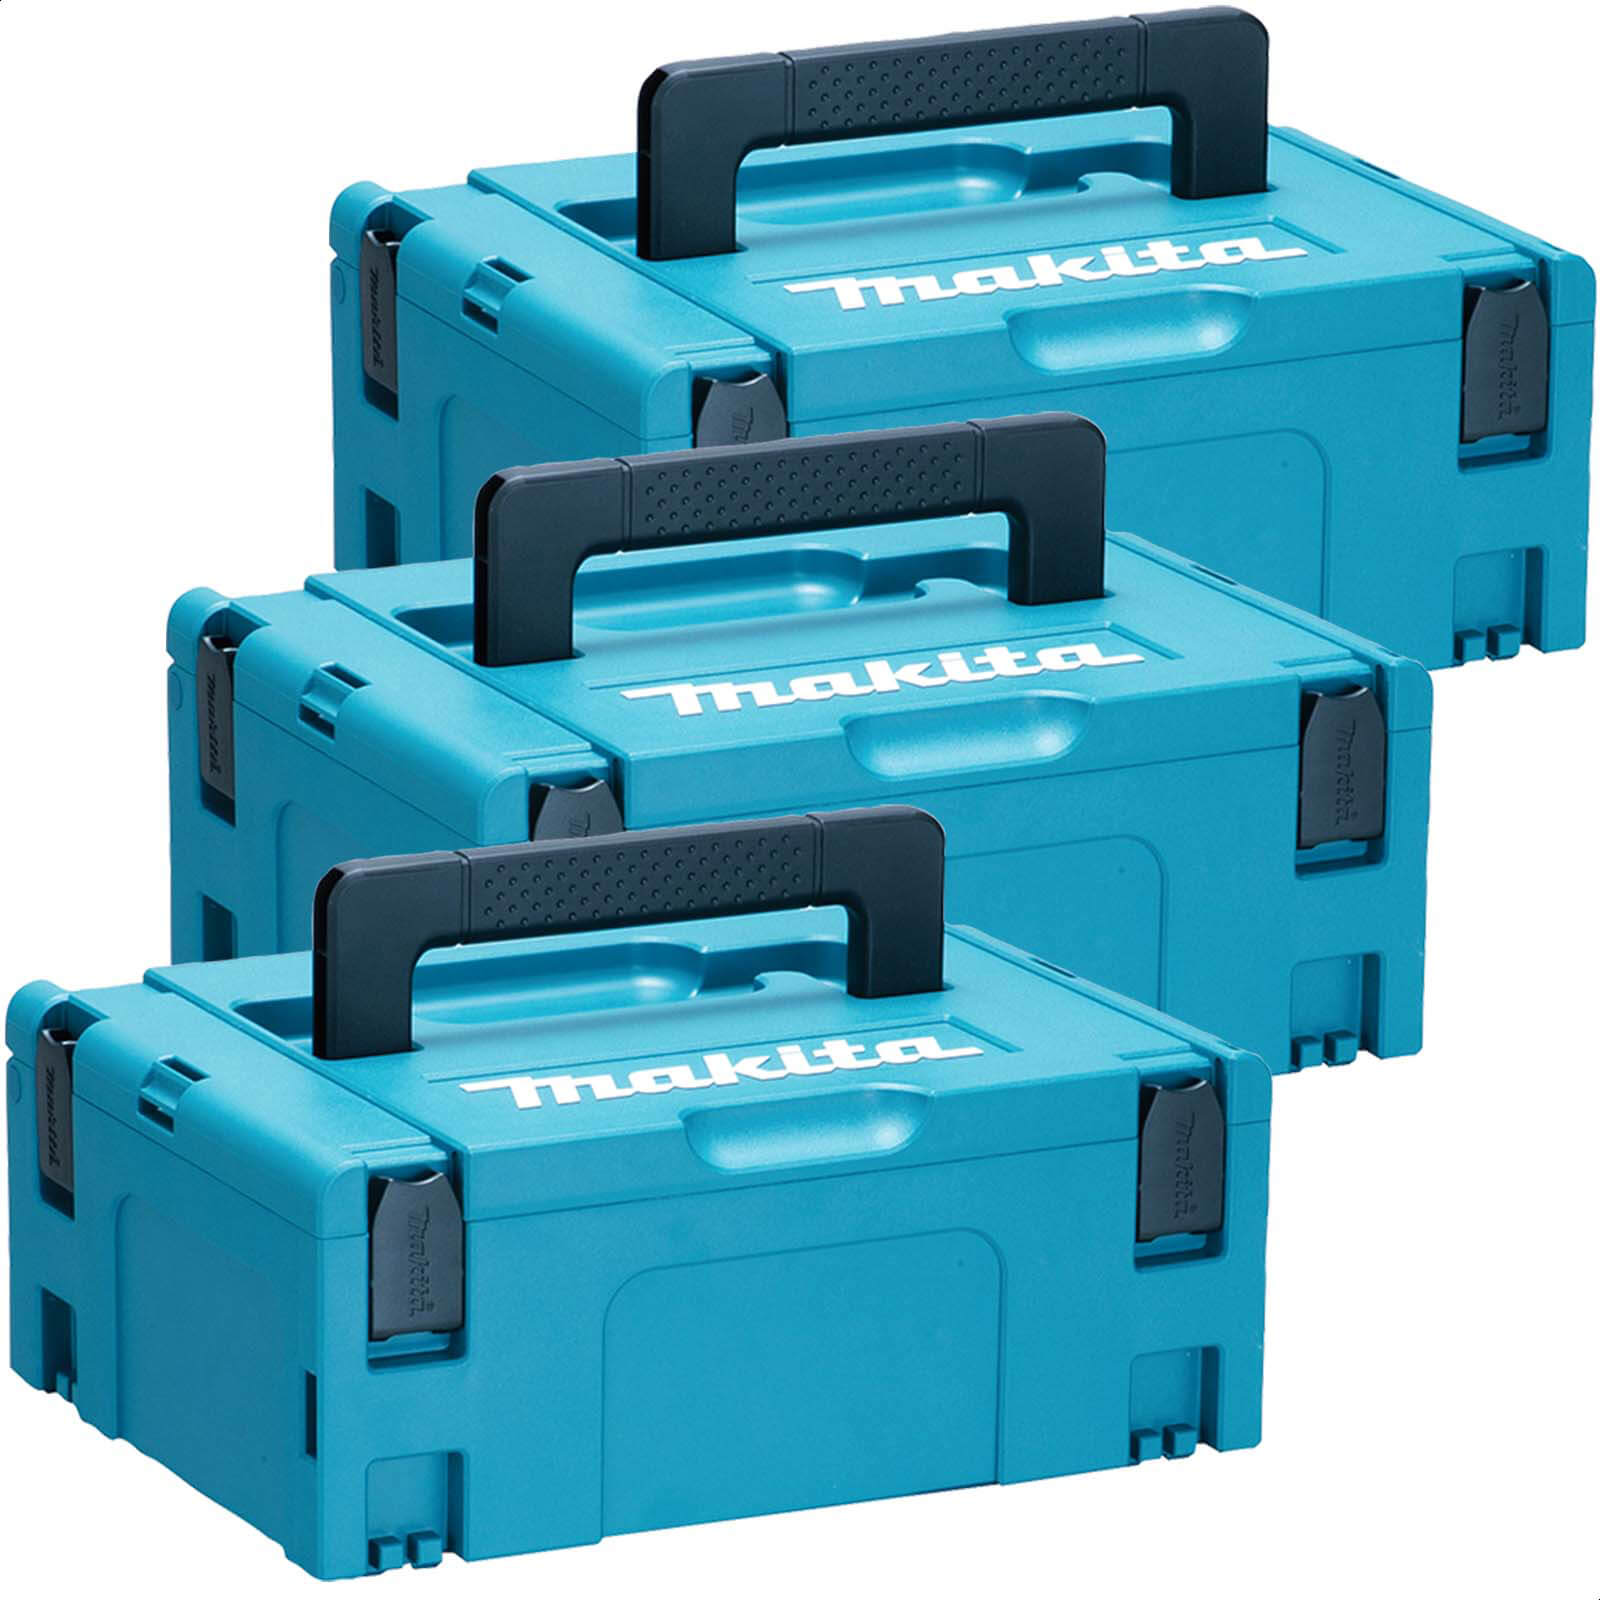 Image of Makita 3 Piece 821550-0 MakPac Connector Stackable Power Tool Case Set